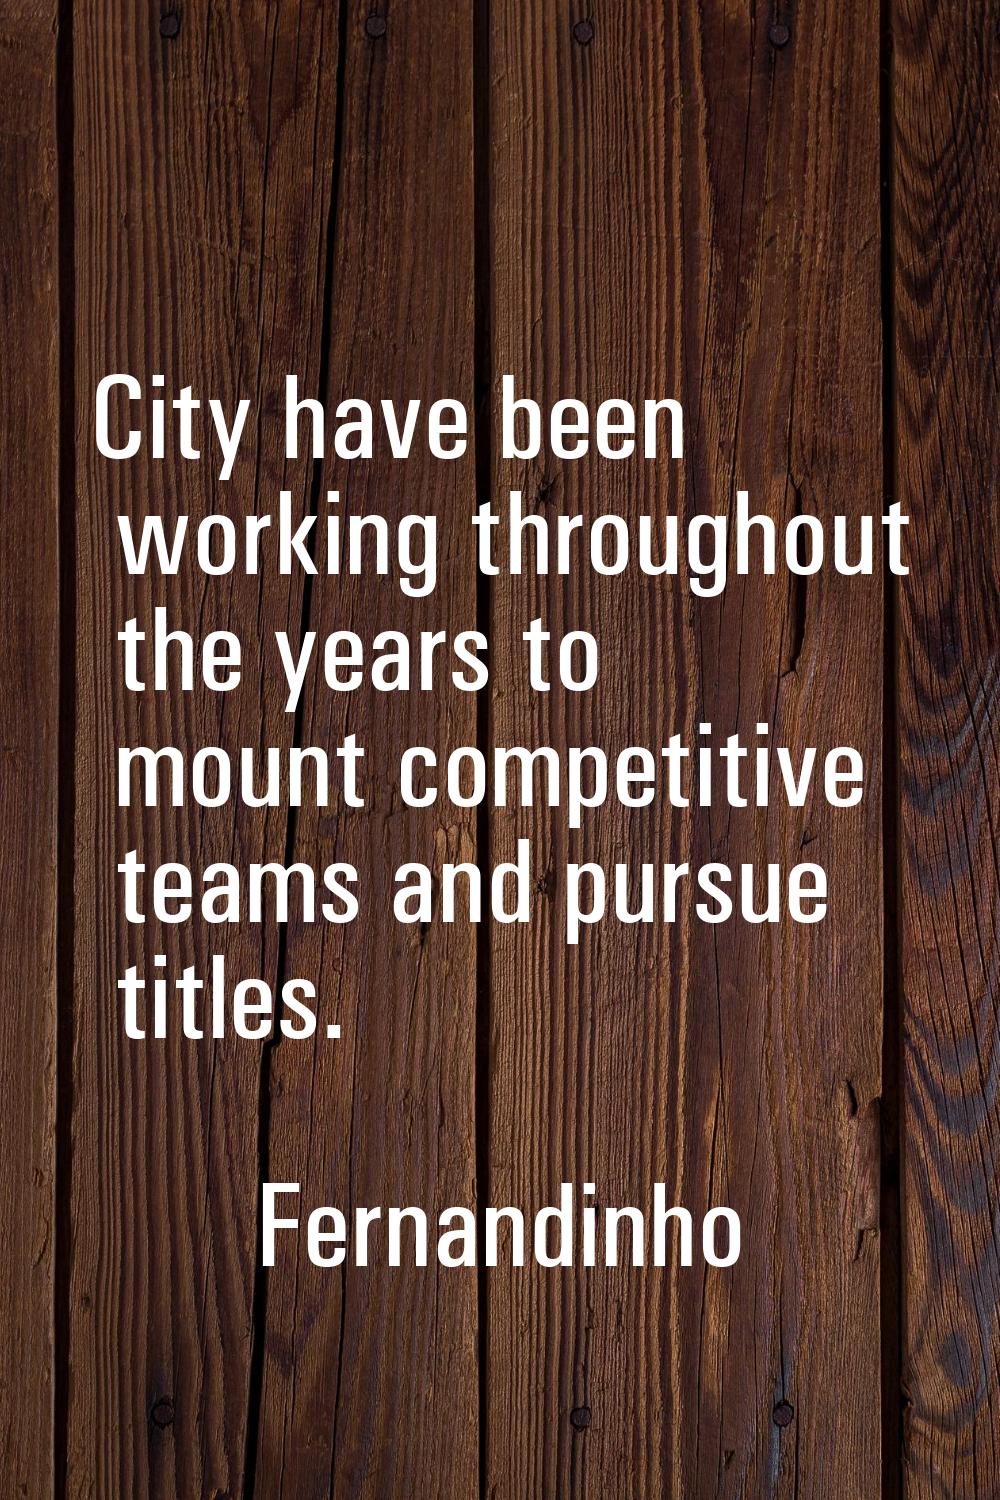 City have been working throughout the years to mount competitive teams and pursue titles.